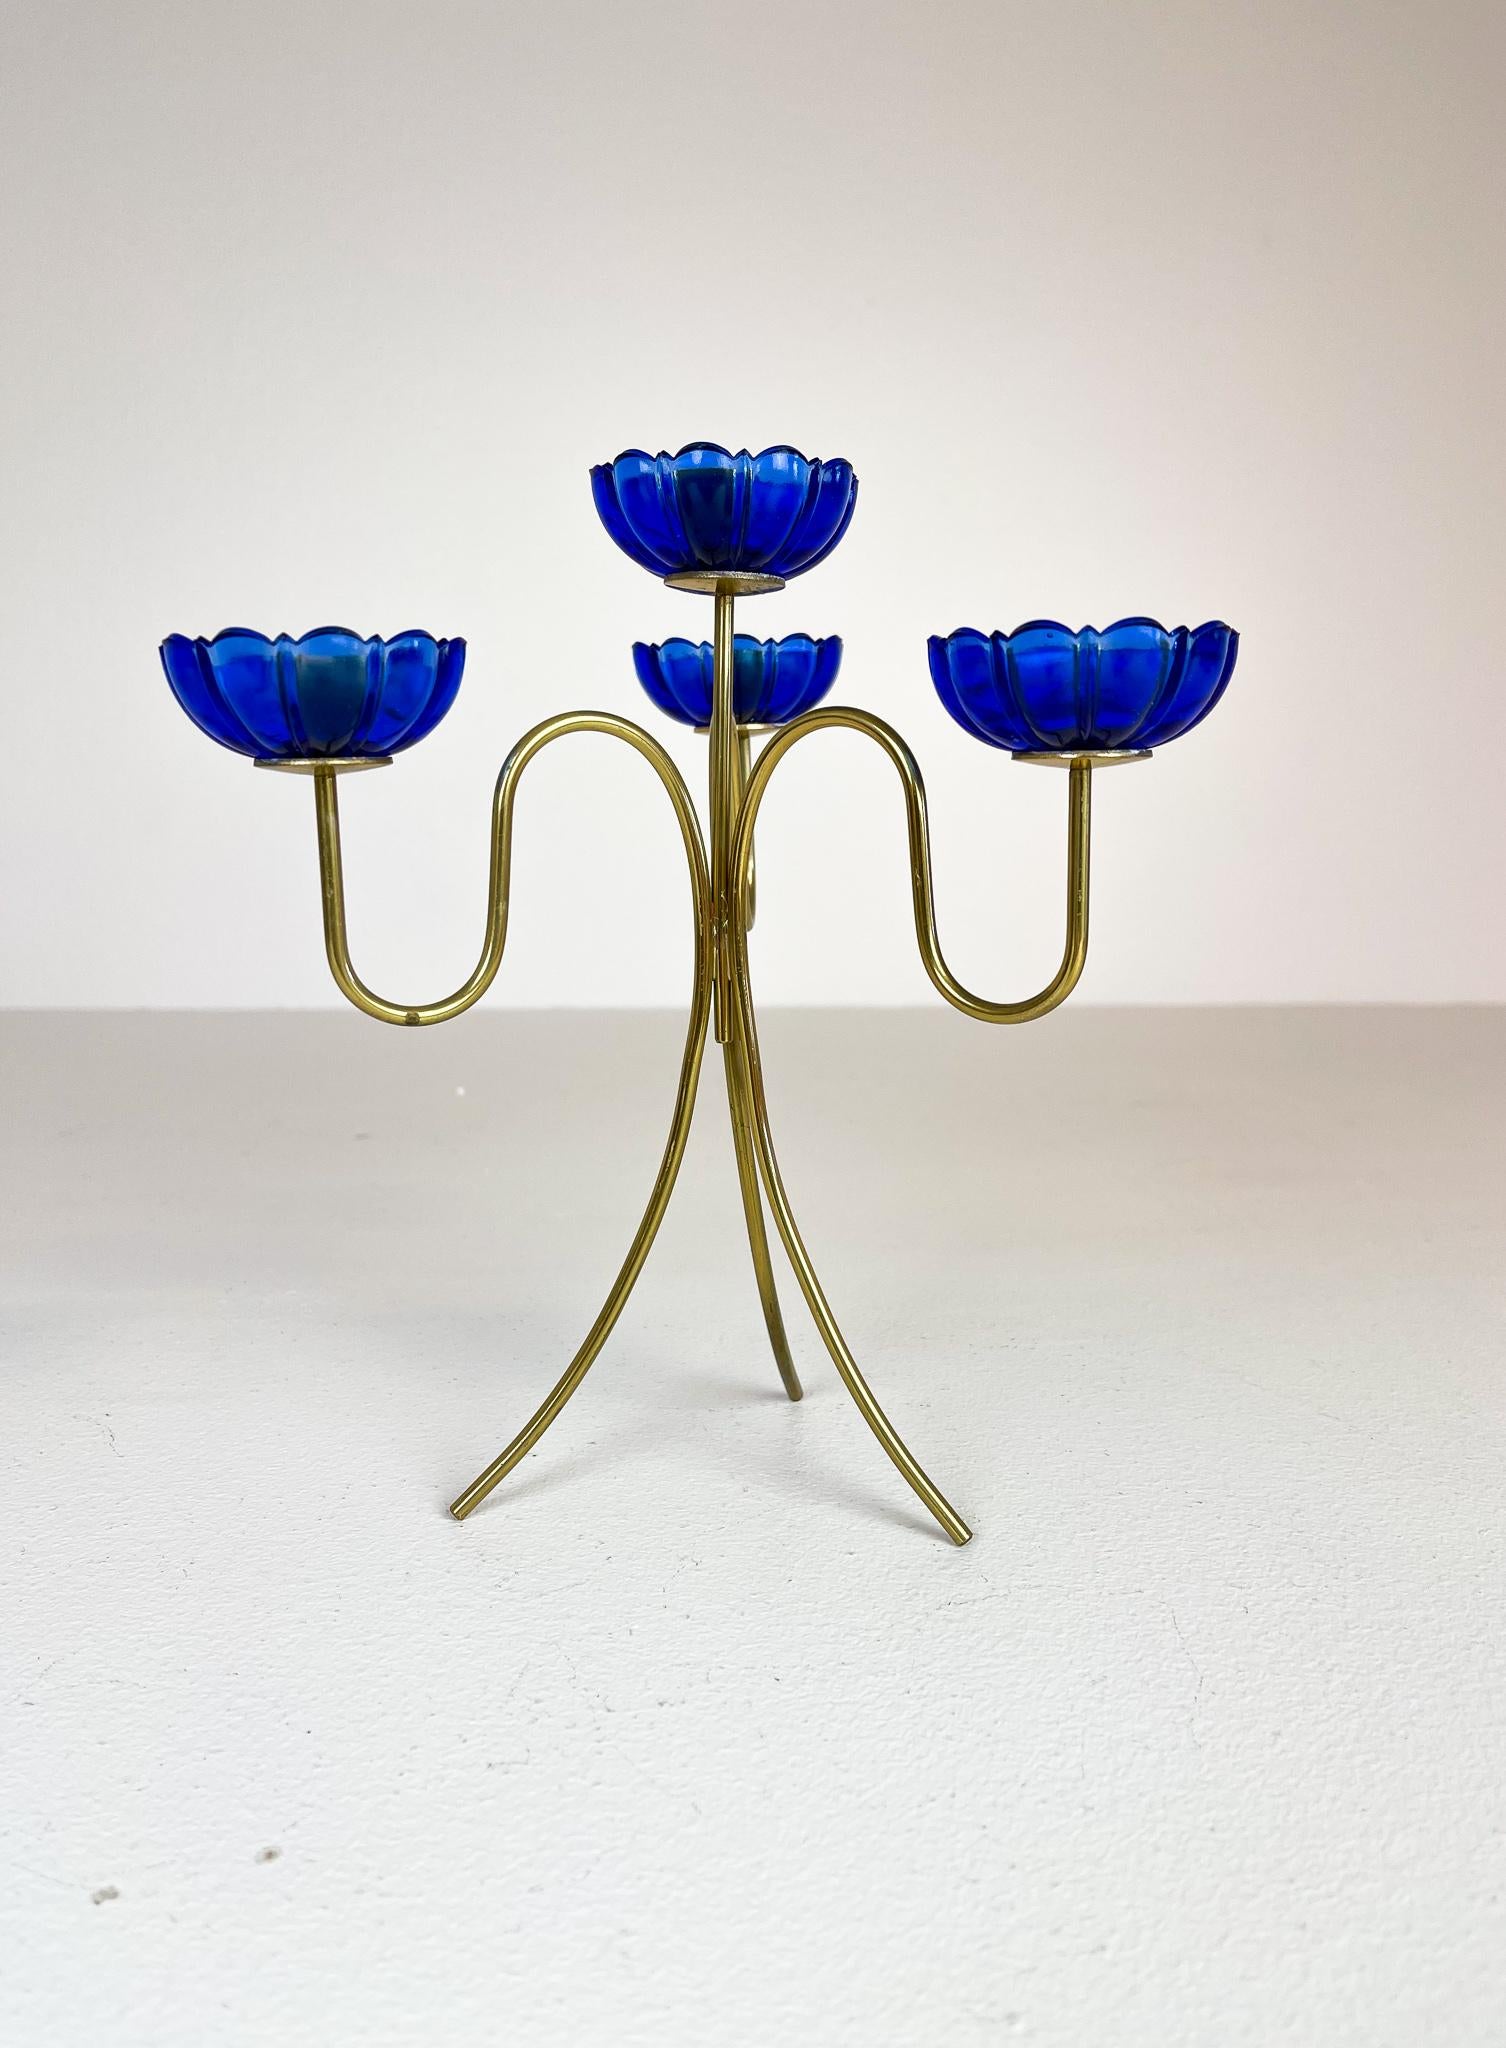 Midcentury Collection of Candle Holders Brass Ystad Metall, Sweden 7